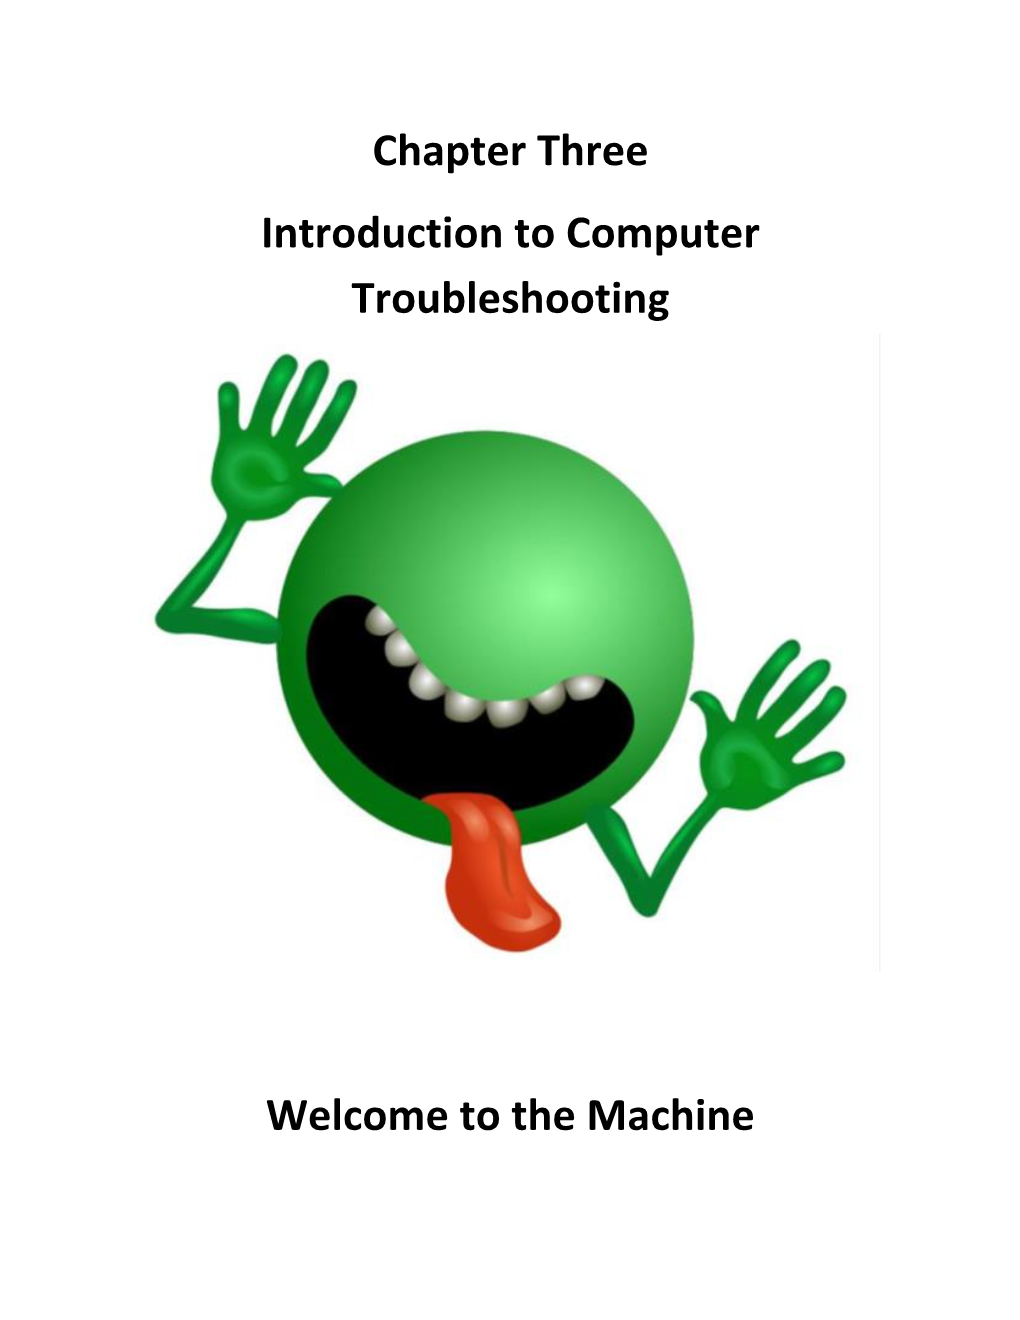 Chapter Three Introduction to Computer Troubleshooting